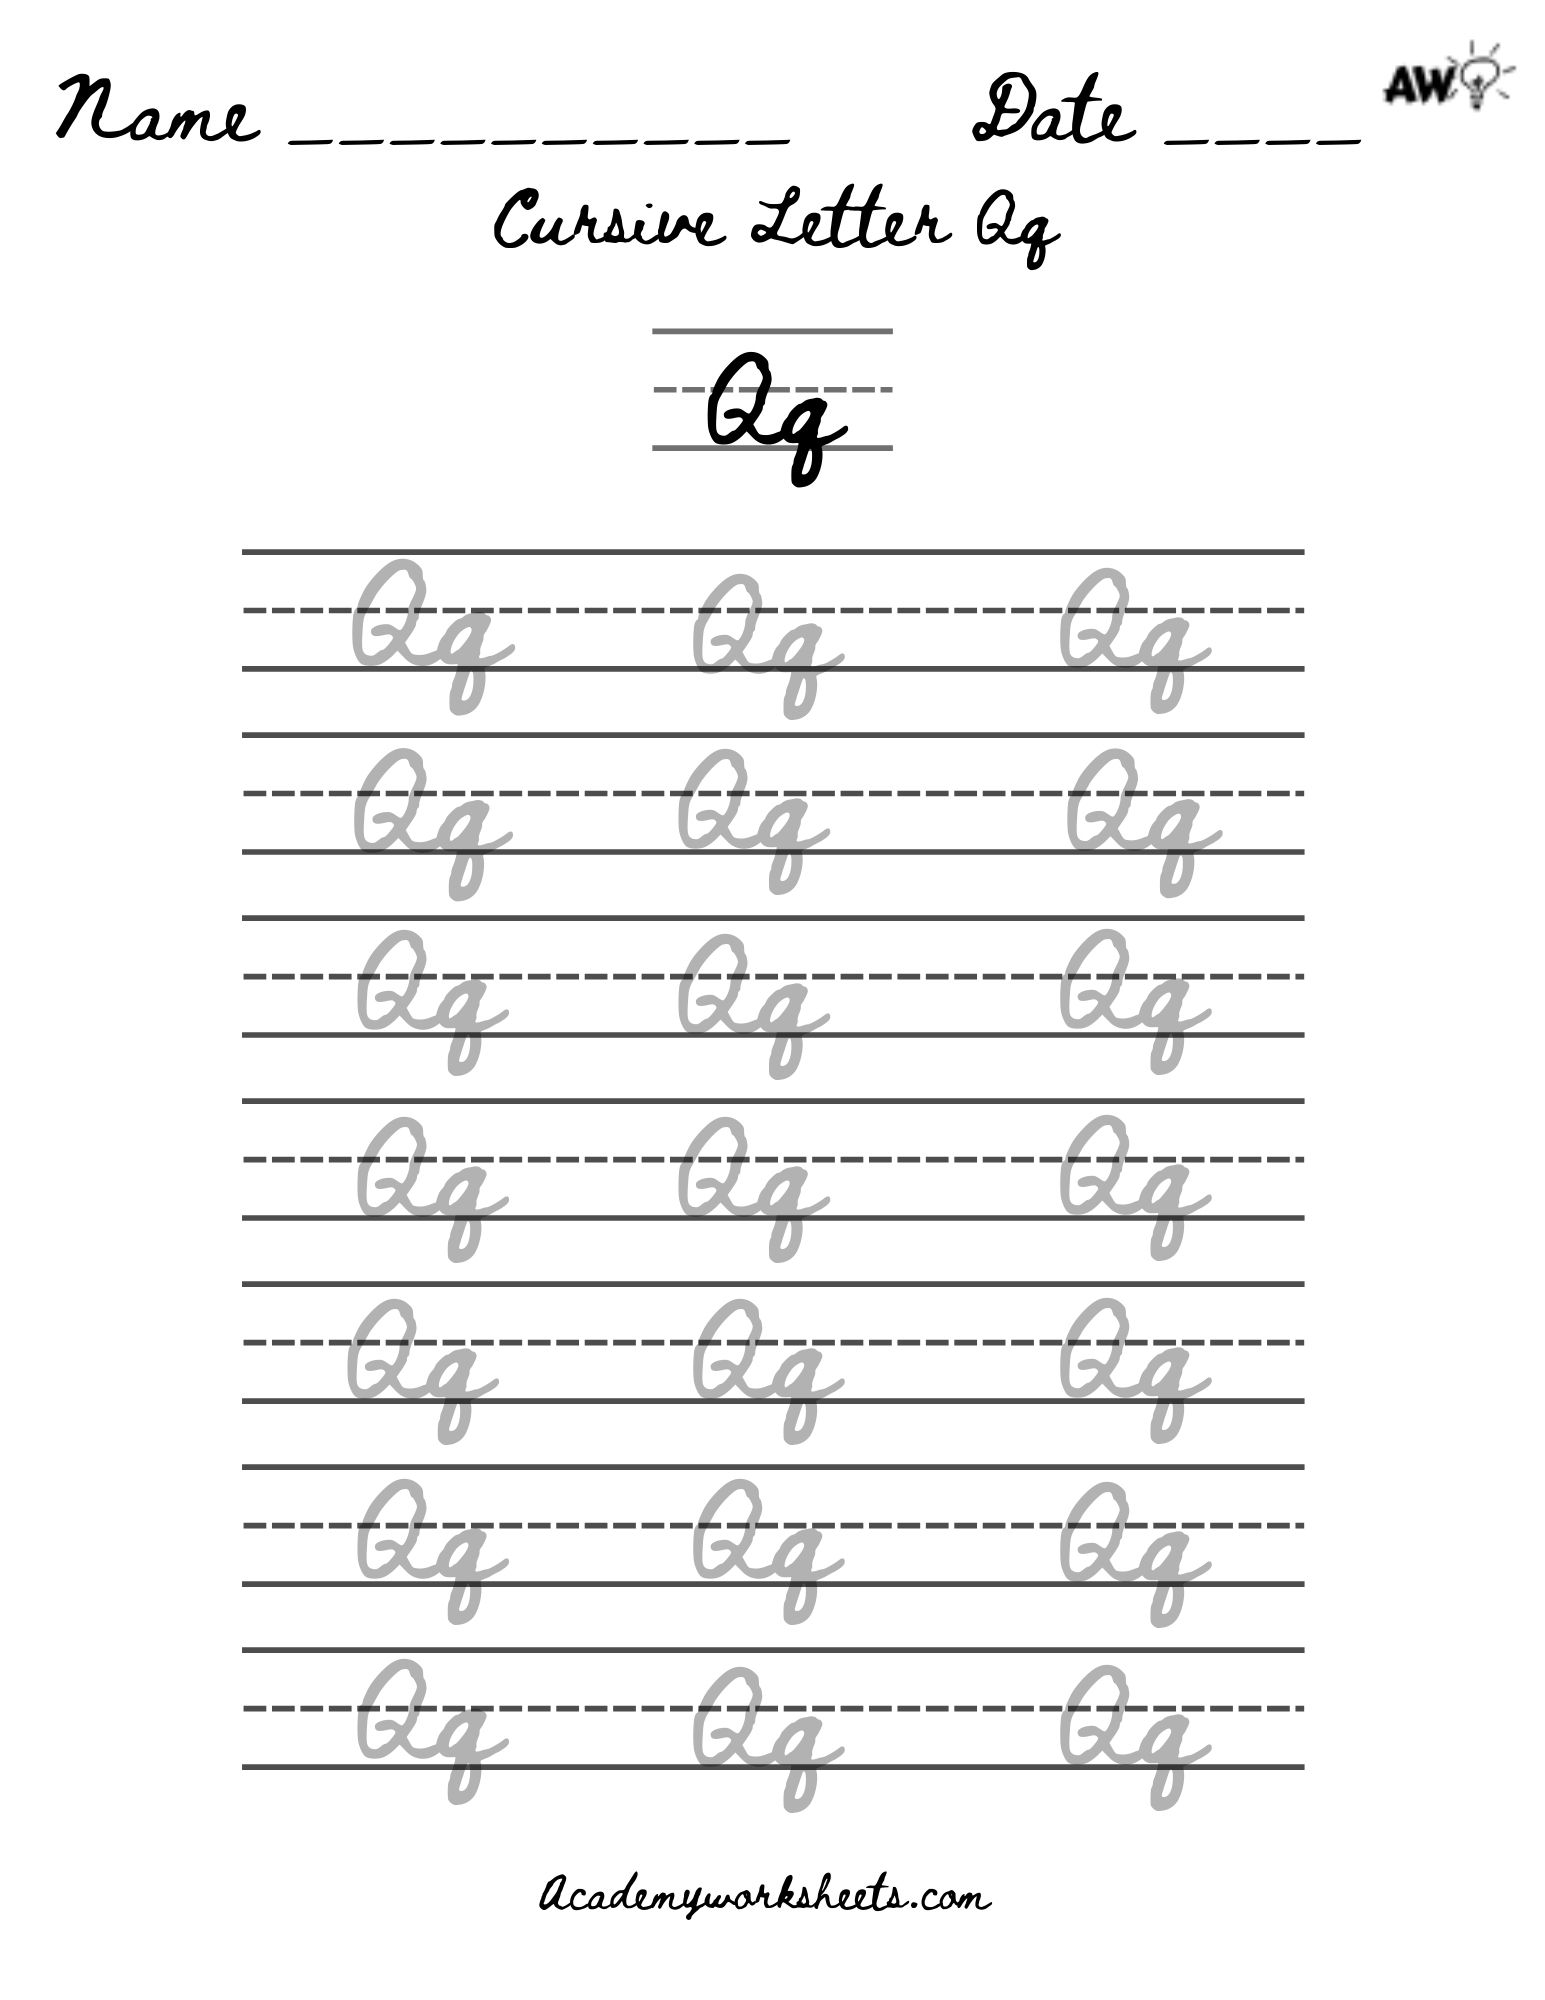 Learn Cursive Q Archives Academy Worksheets